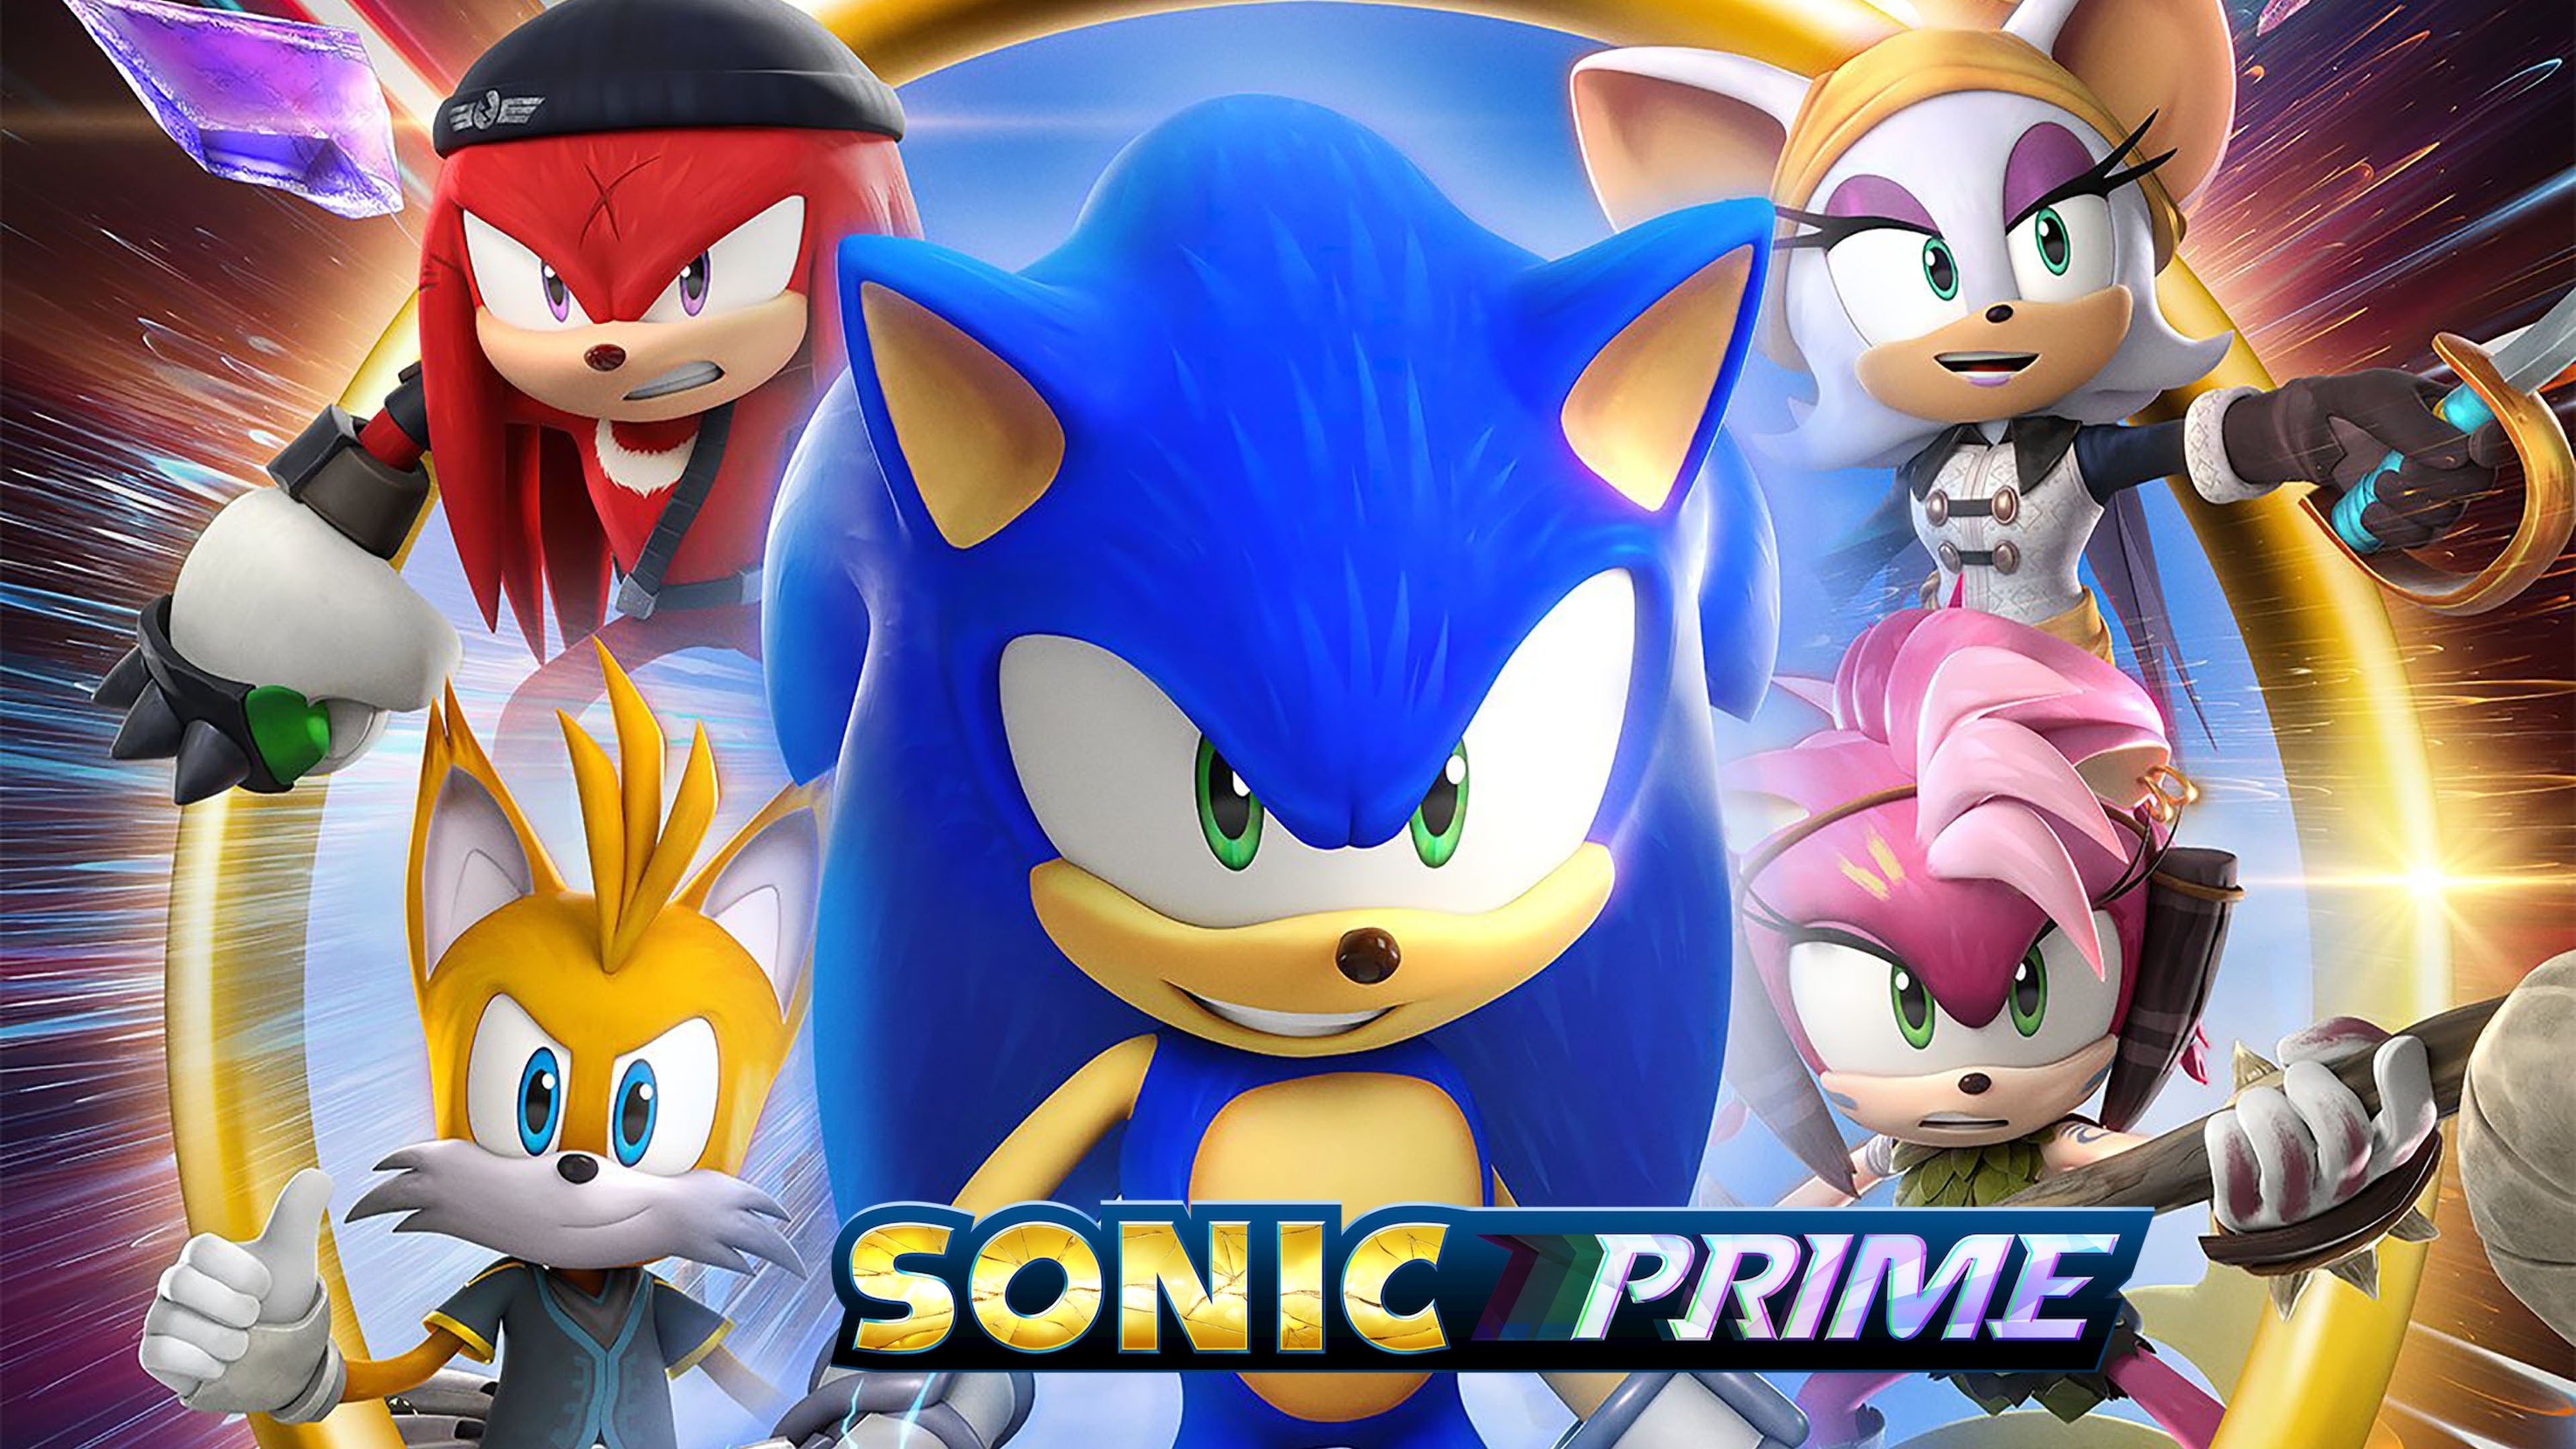 IGN on X: IGN can exclusively reveal that Netflix's Sonic Prime